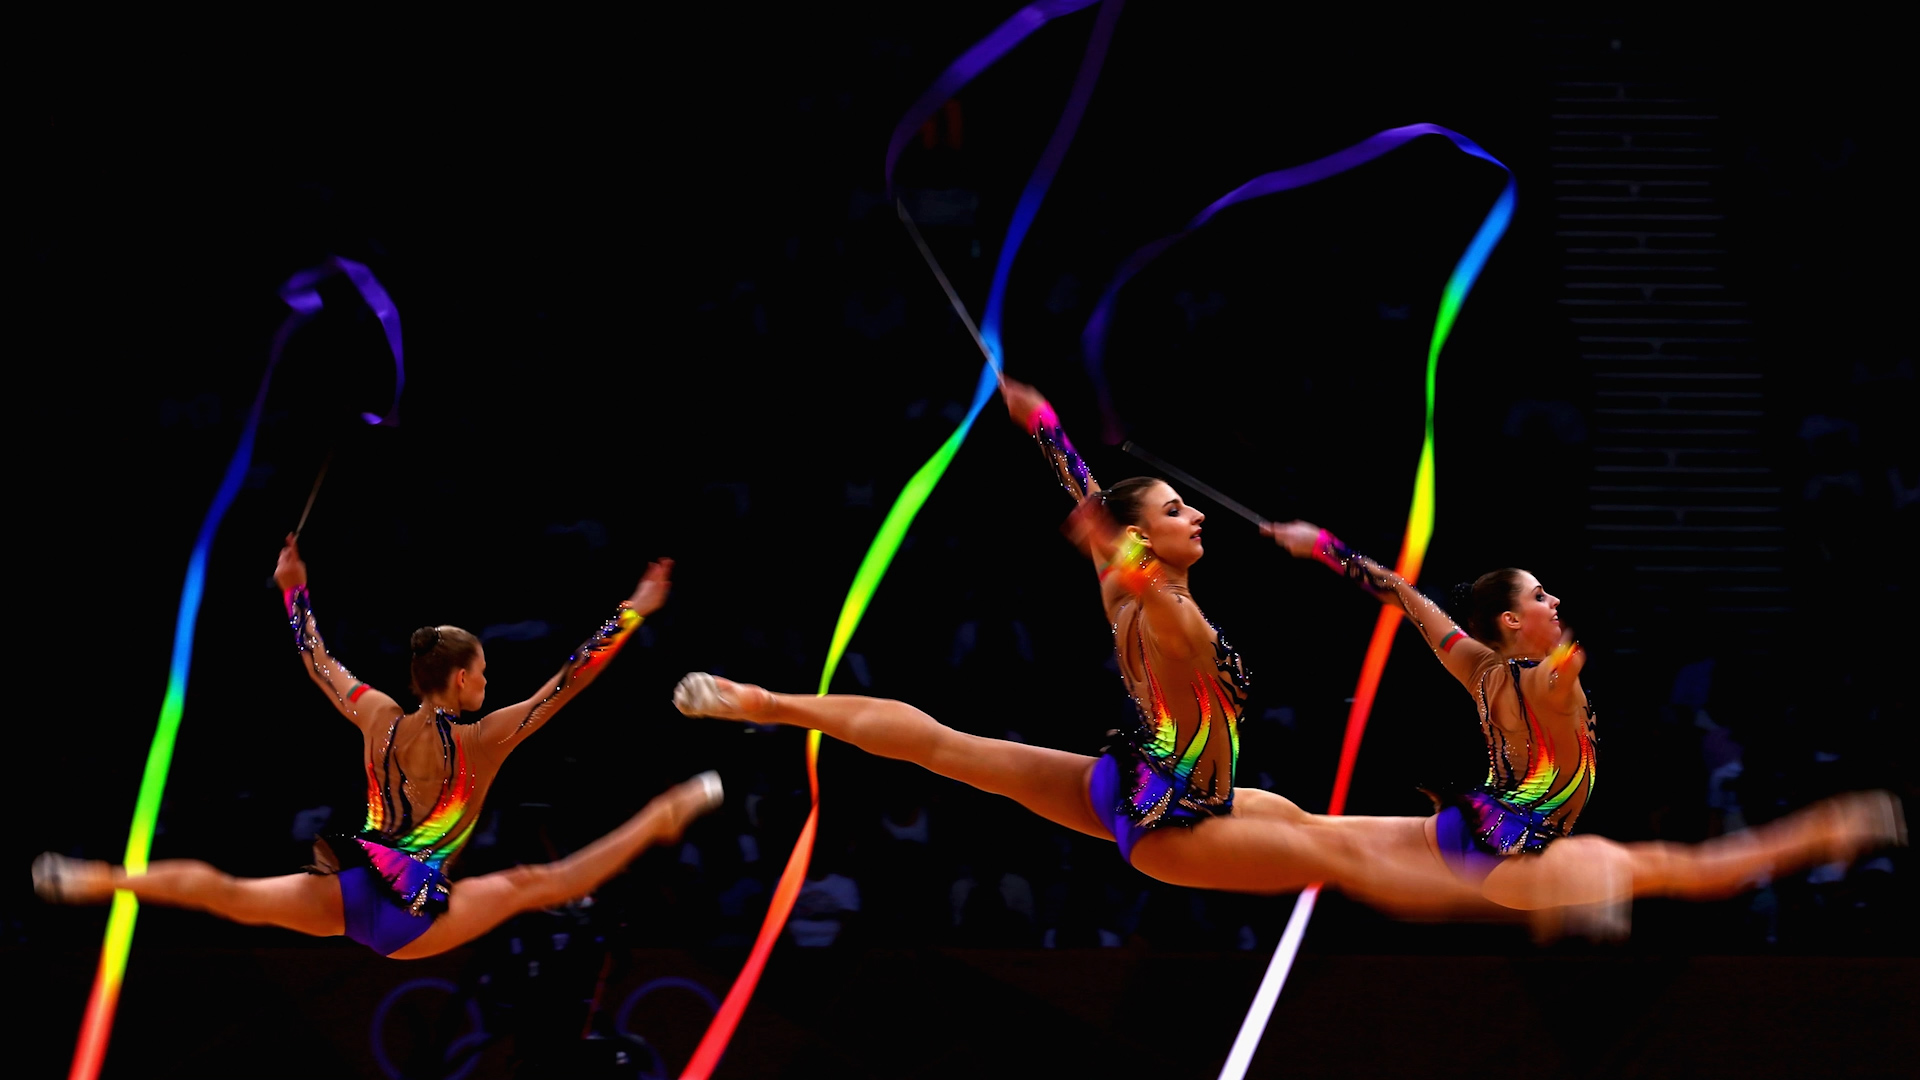 Zeng qualifies to clubs, all-around final at Rhythmic Worlds • USA